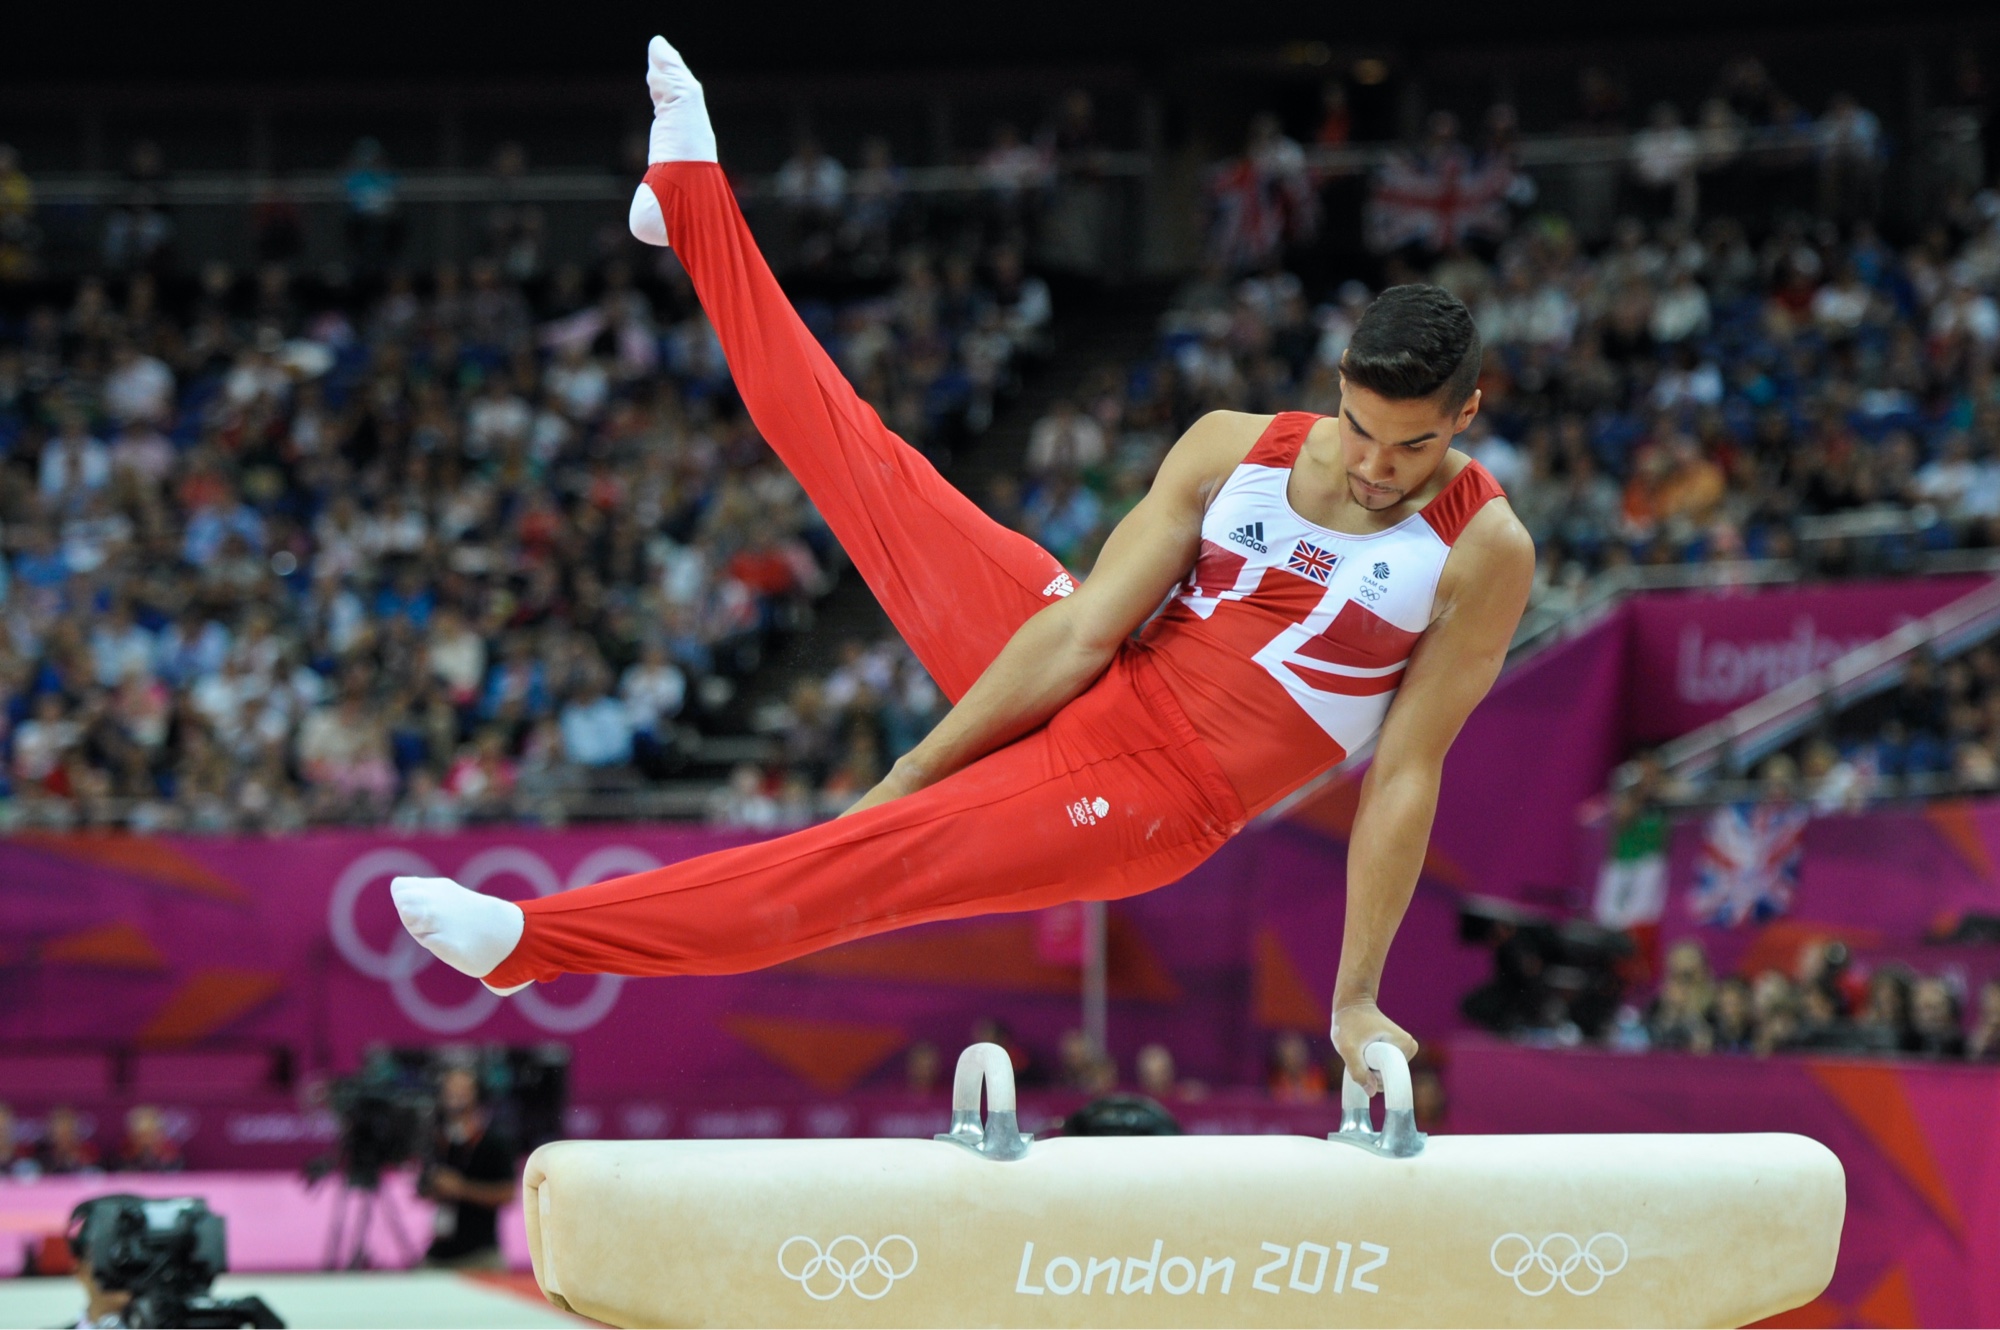 Louis Smith performing in the Pommel Final at the London 2012 Olympics BG 1051